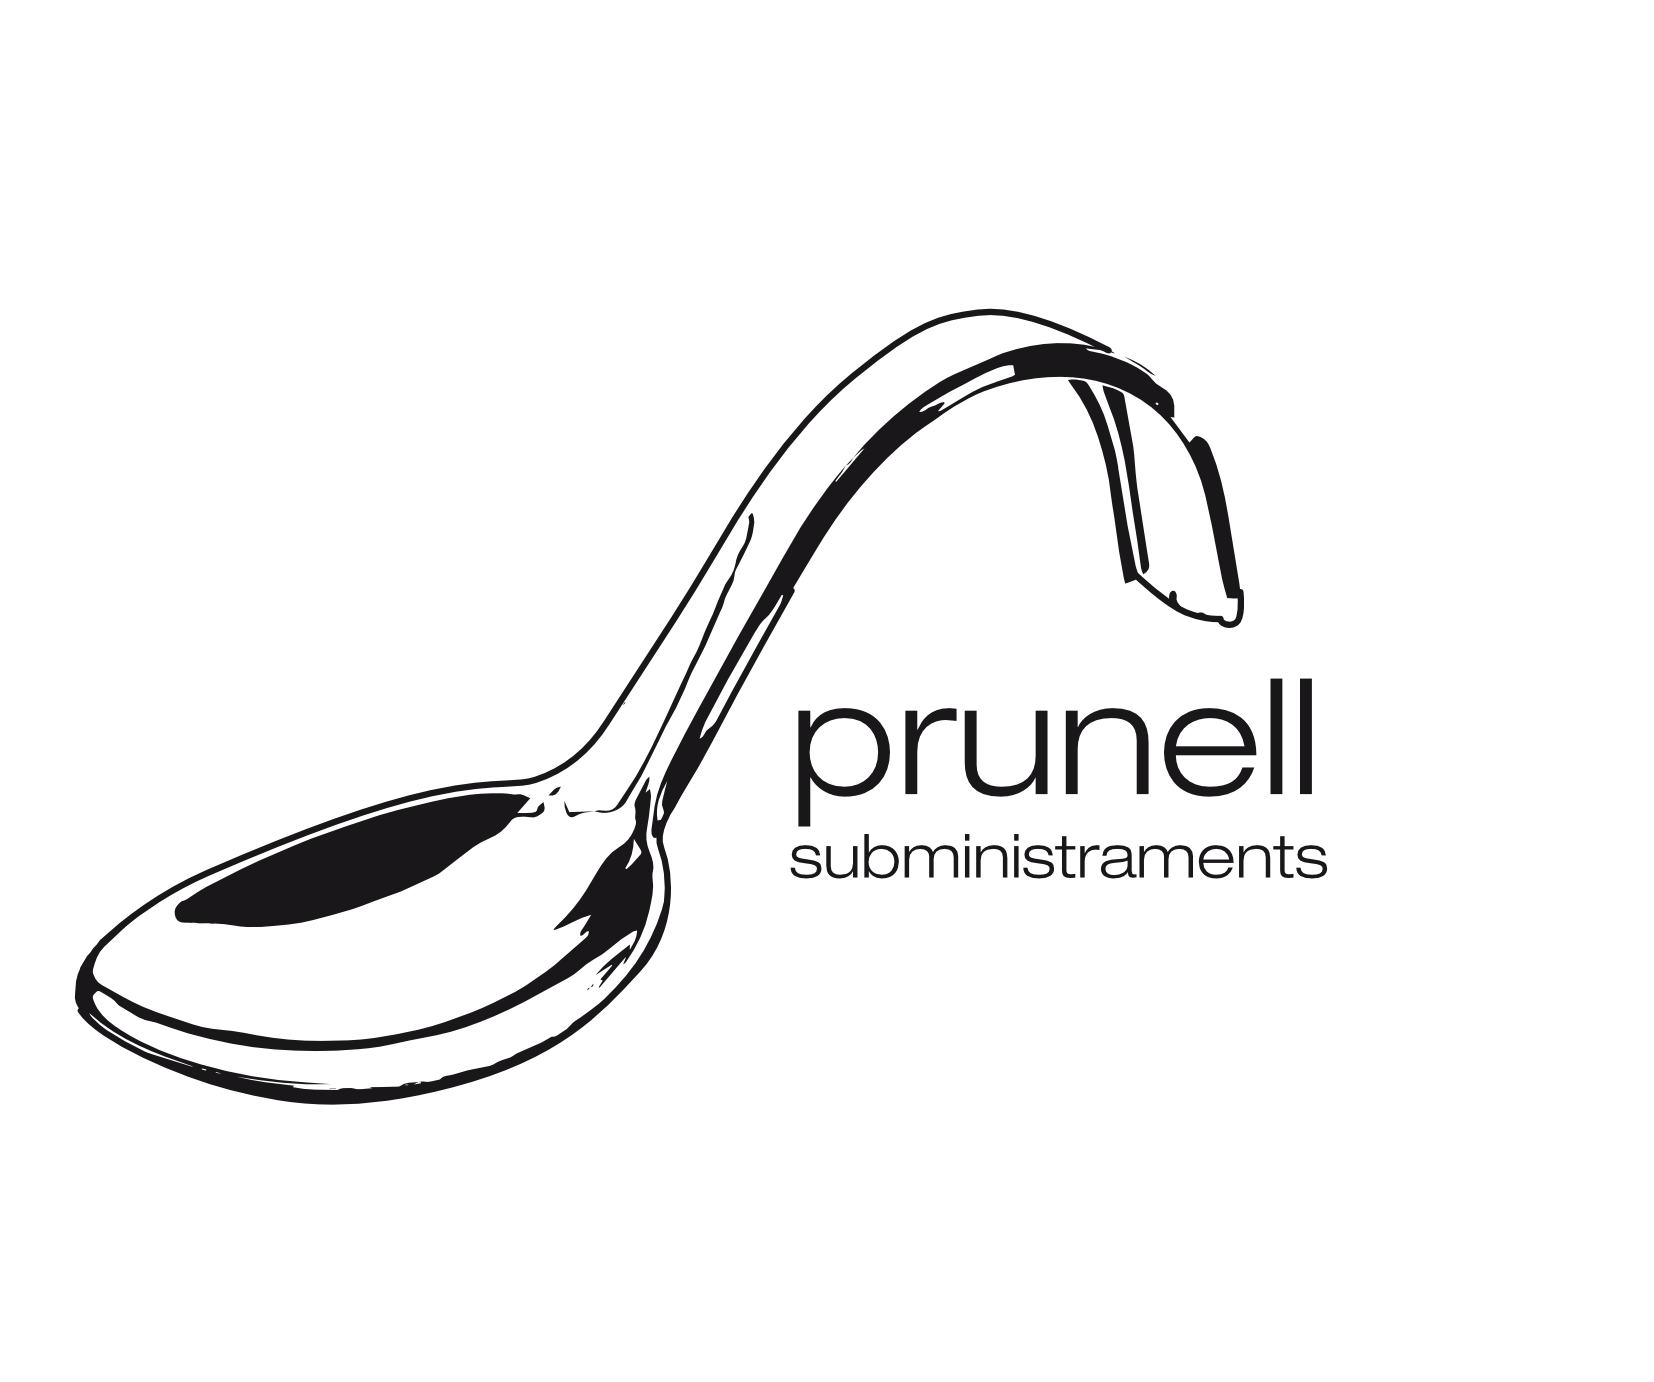 Subministraments Prunell